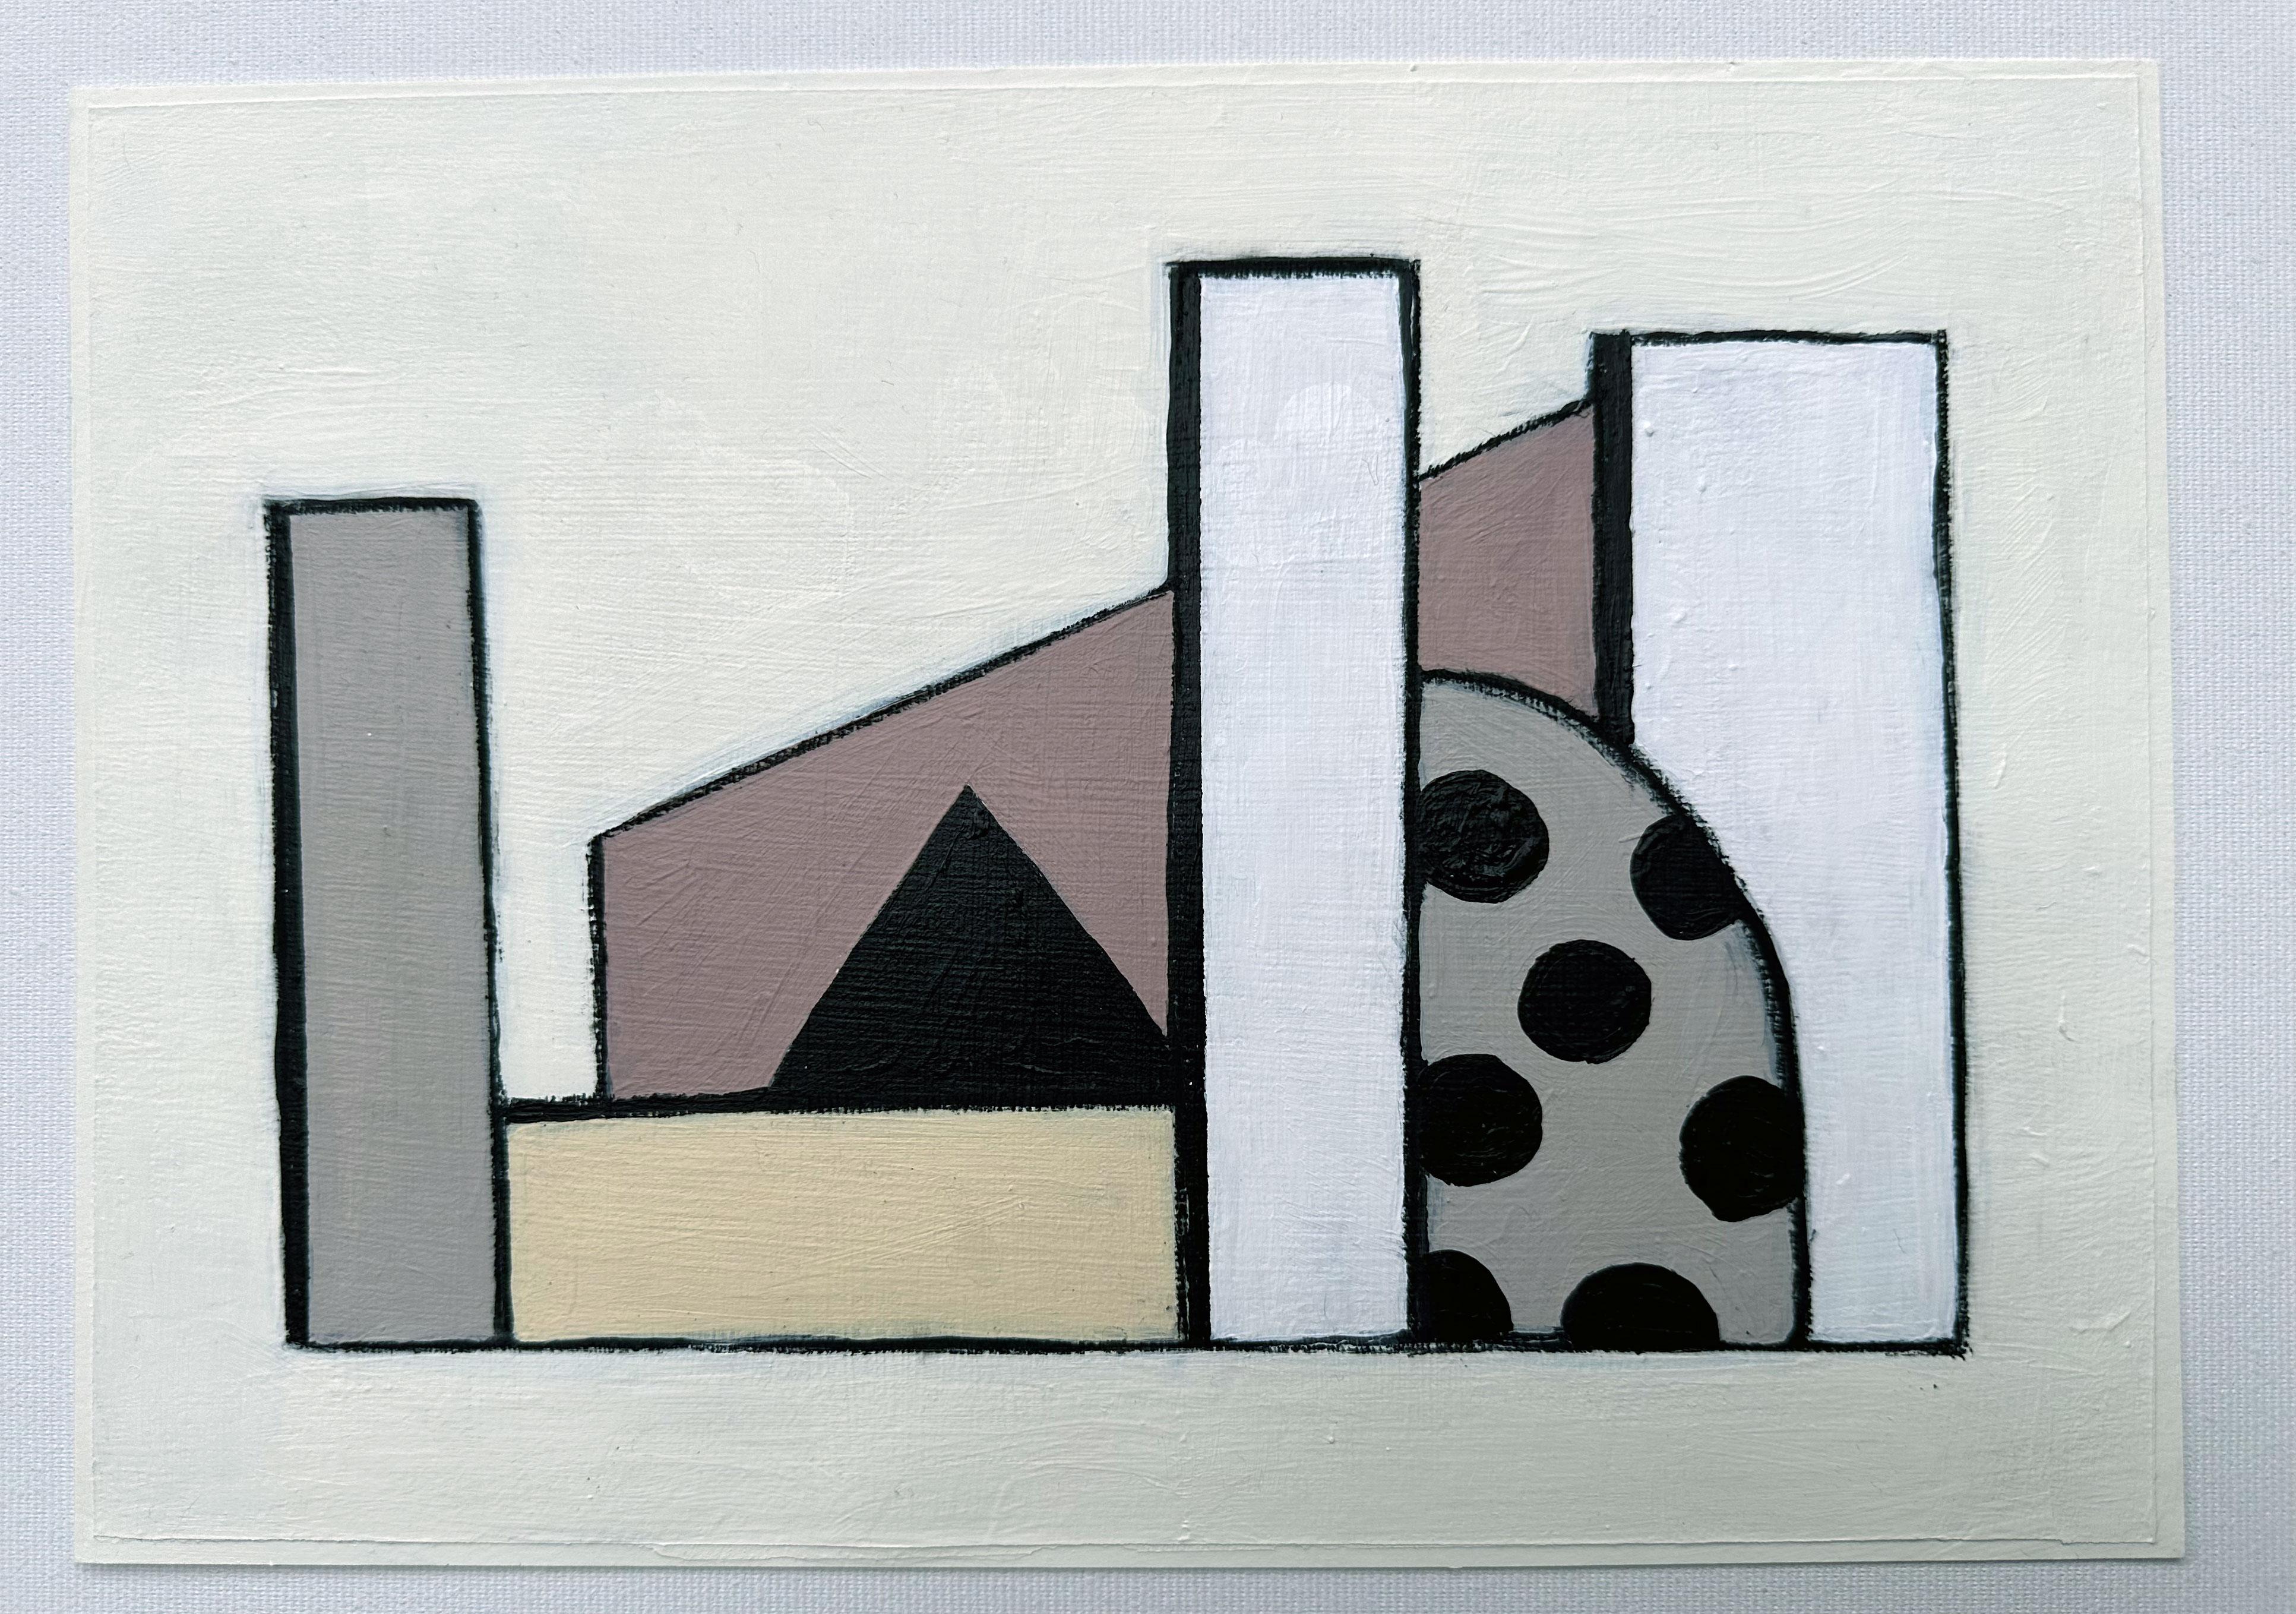 One in a series of three small works created in 2021 with acrylic paint and charcoal on 270g archival quality paper.
This abstract urban landscape painting was inspired by brutalist architecture and fever dreams of a slow moving polka dotted blob. A